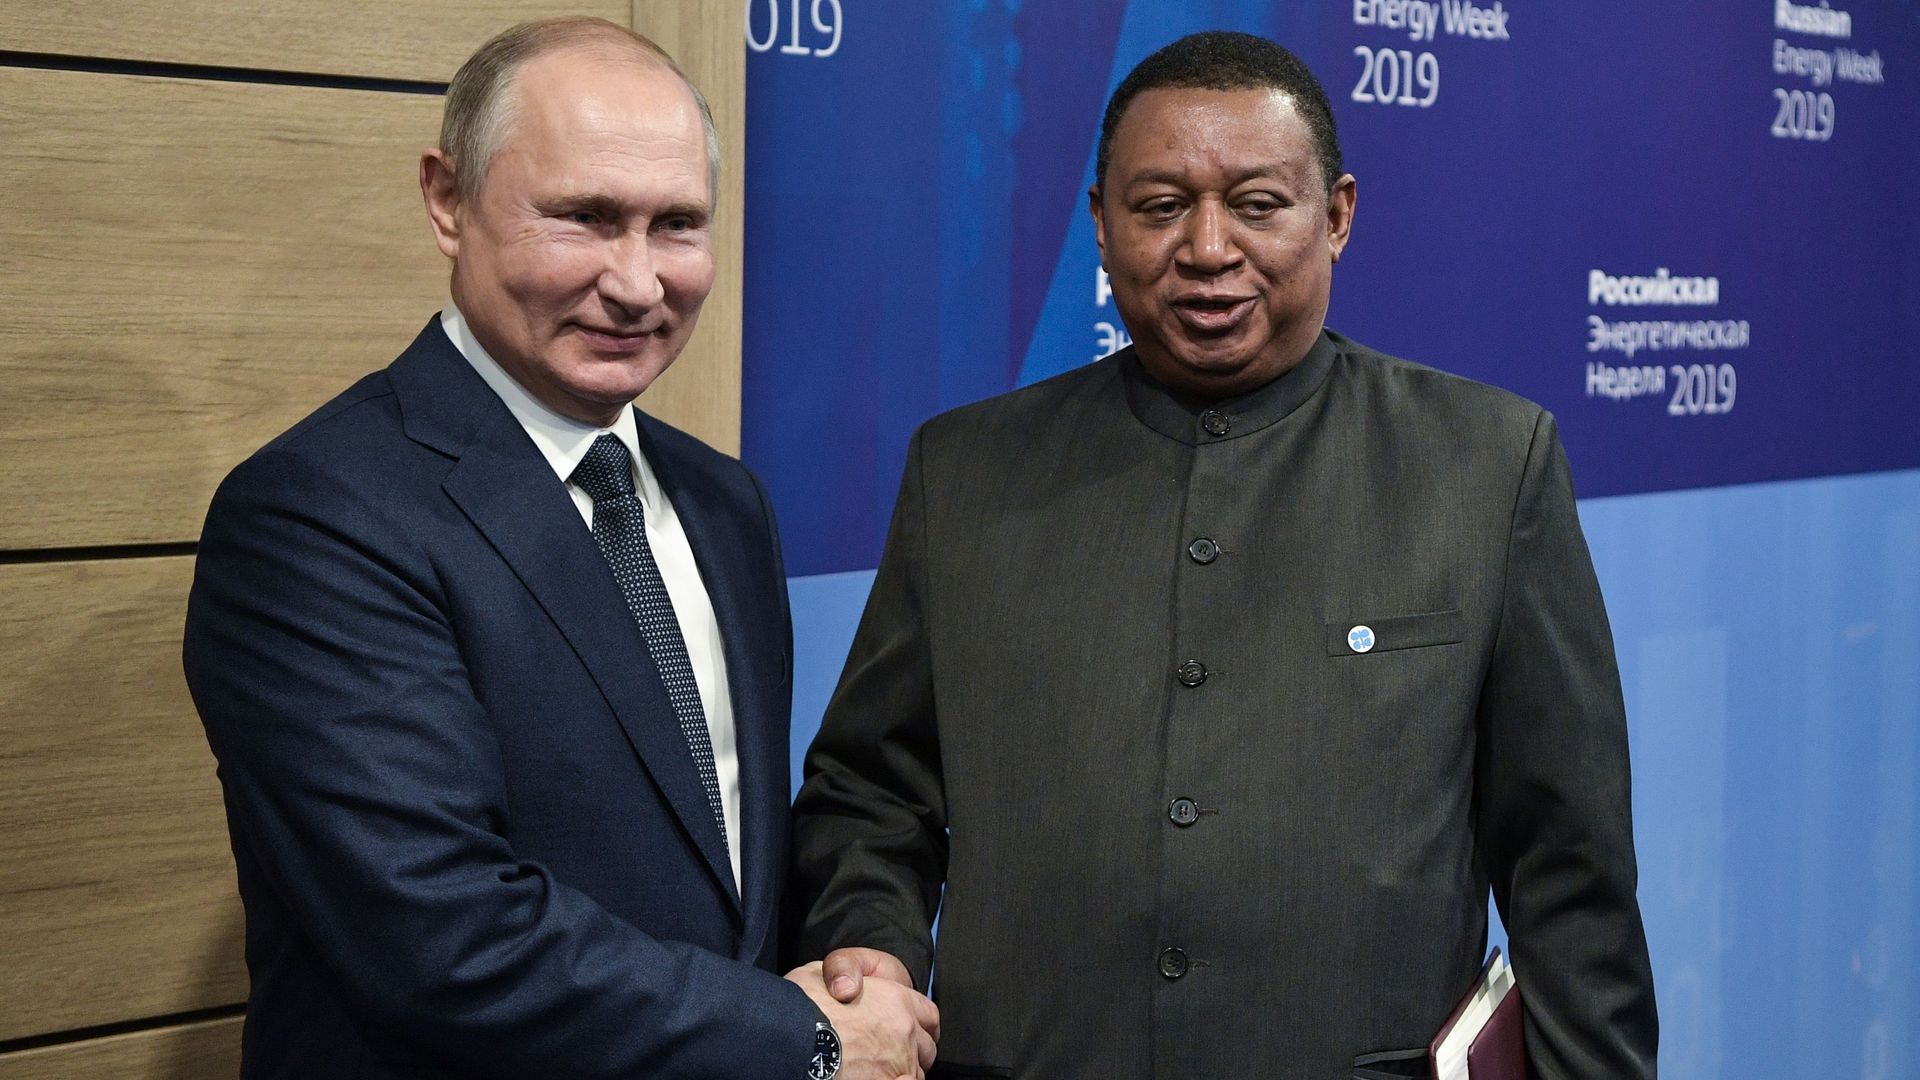 OPEC Secretary General Mohammed Barkindo (R) shakes hands with Russian President Vladimir Putin (L) during their meeting on the sidelines of the 2019 Russian Energy Week forum in Moscow, on October 2,